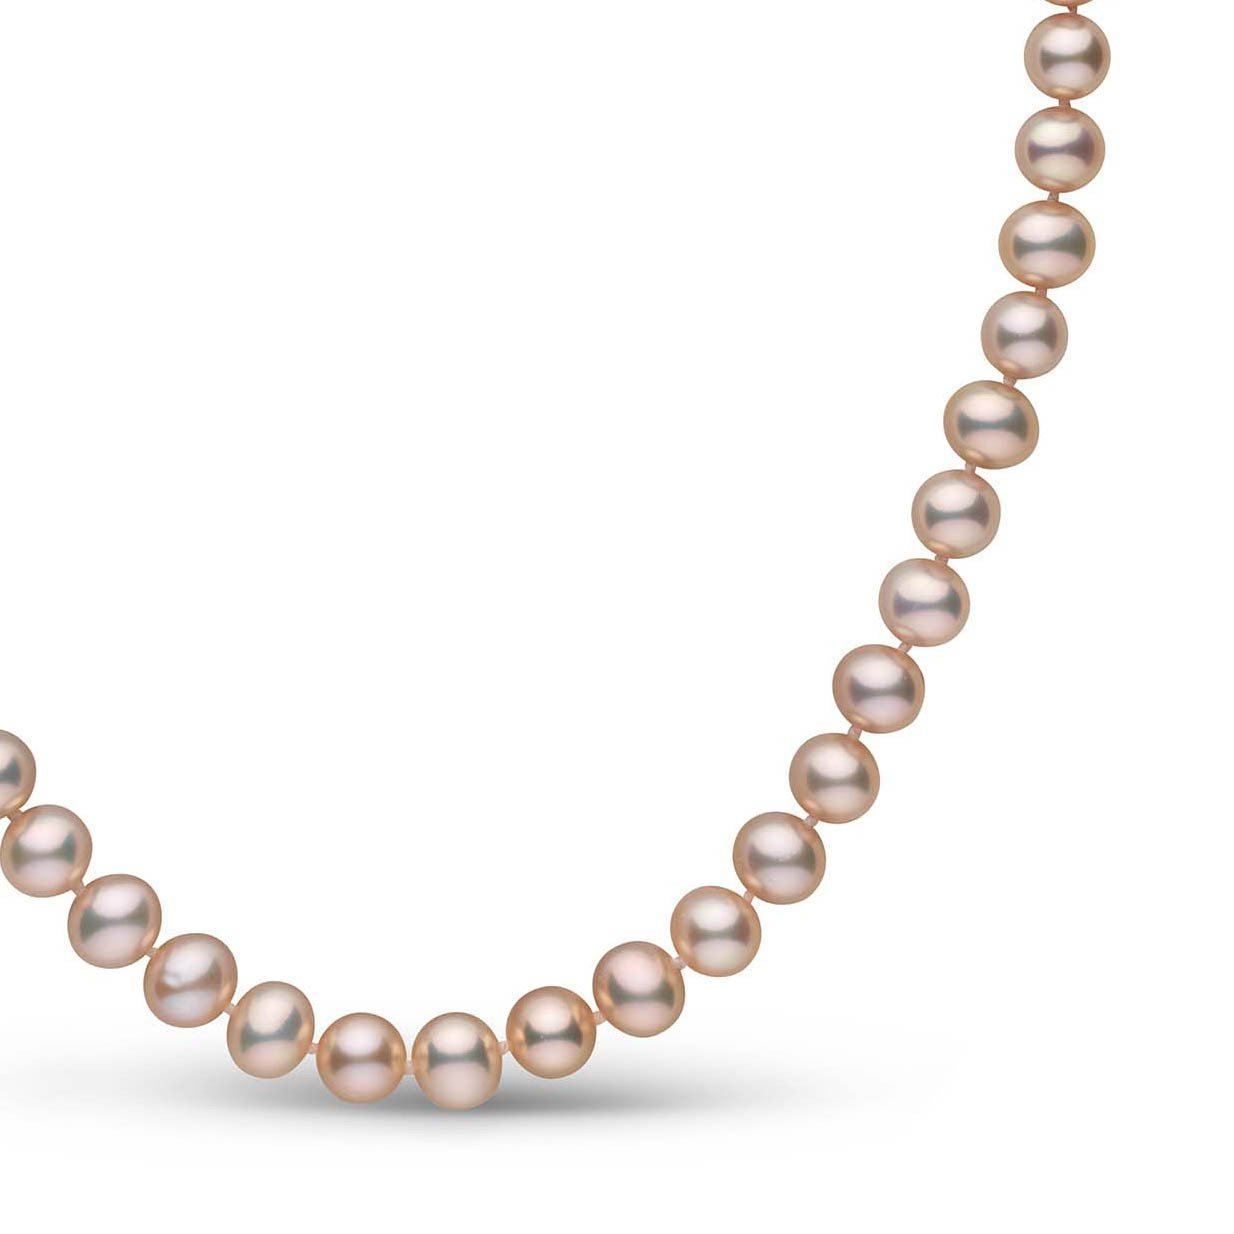 6.5-7.0 mm Metallic Pink to Peach AA+ Freshwater Pearl Necklace Close Up